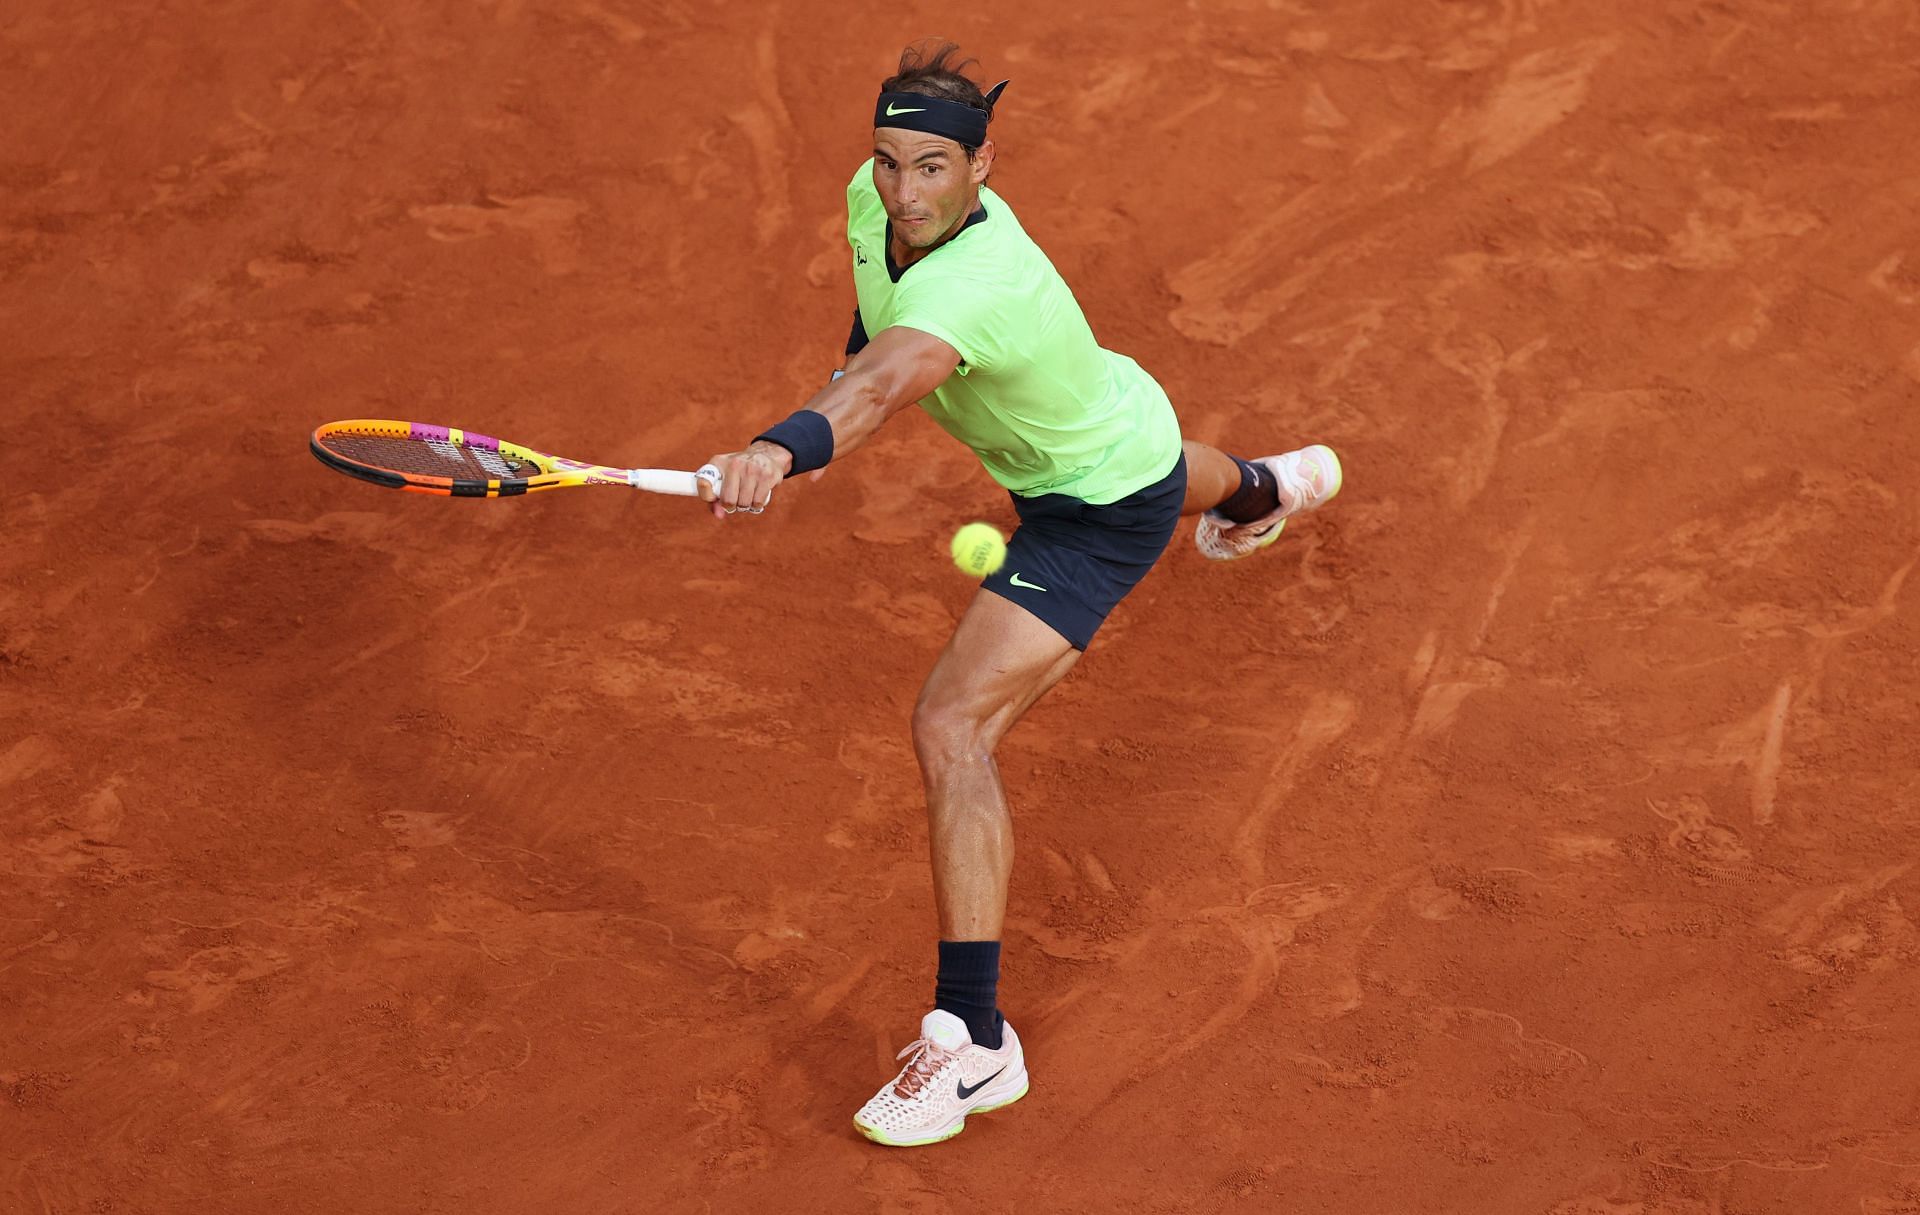 Rafael Nadal in action at the 2021 French Open